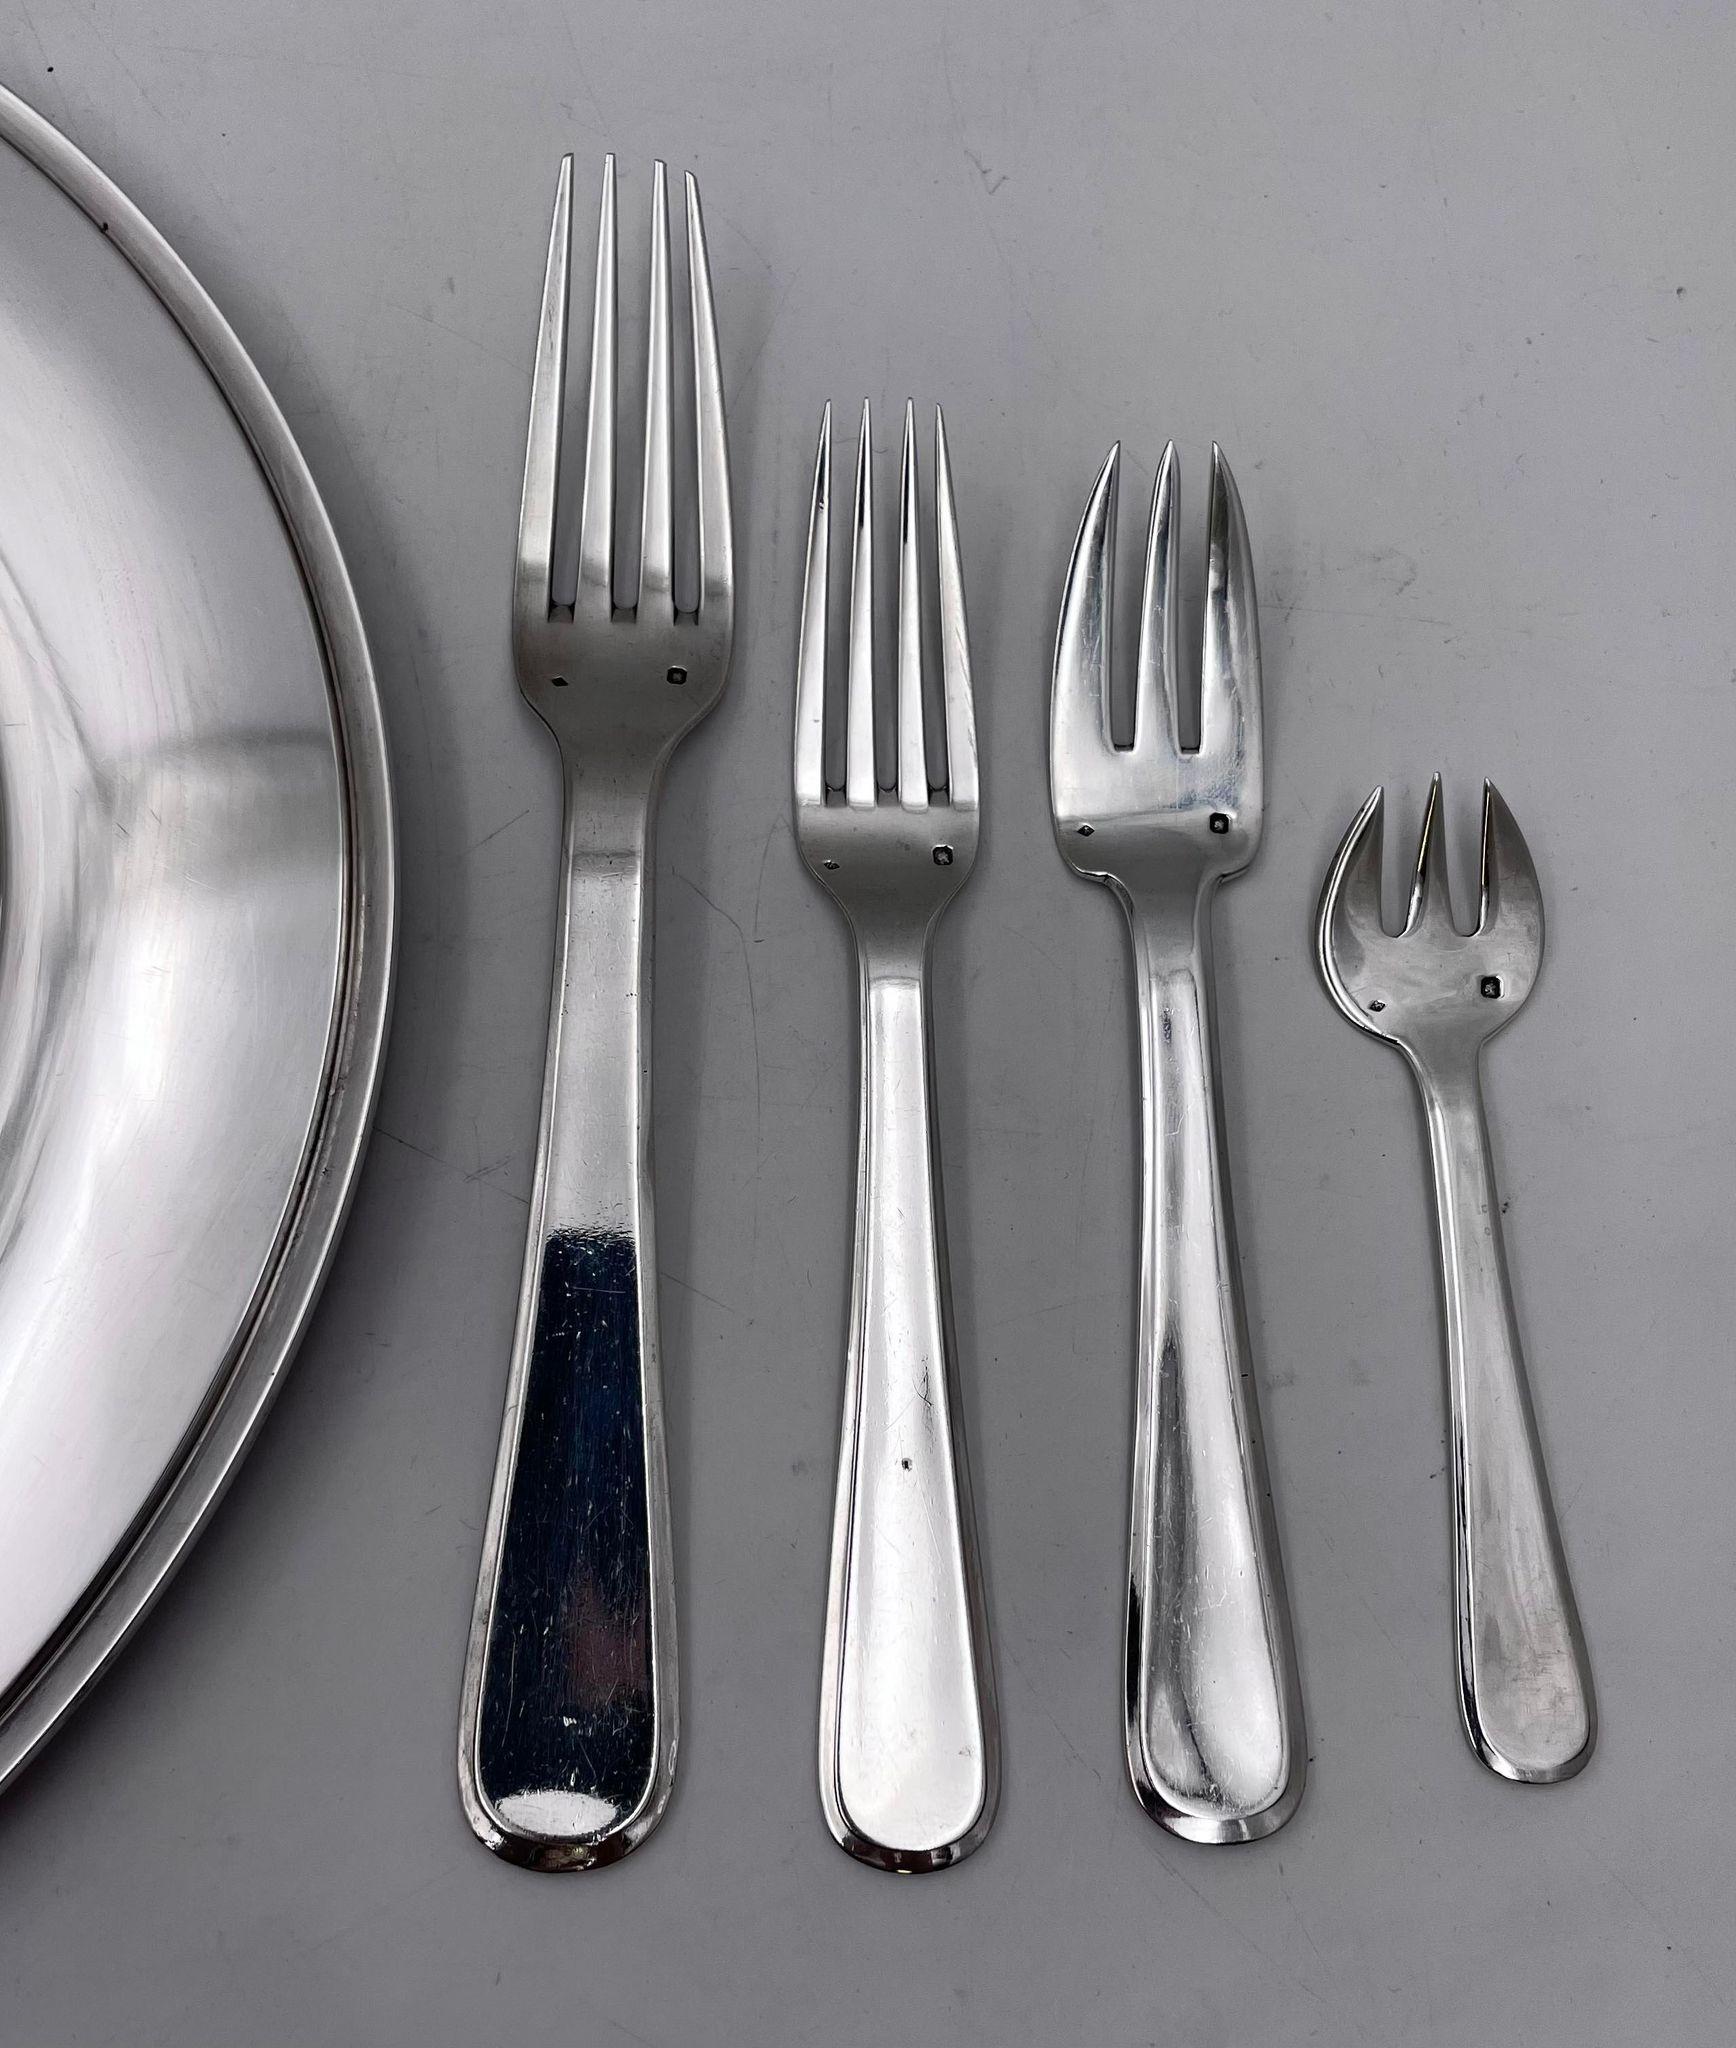 Tétard Frères sterling silver 160-piece Parisian flatware set in rare Art Deco pattern (possibly Valios). The set comprises of :

- 12 steel-bladed dinner knives (8 7/8 in)

- 11 steel-bladed dessert knives (7 3/8 in)

- 12 solid fish knives